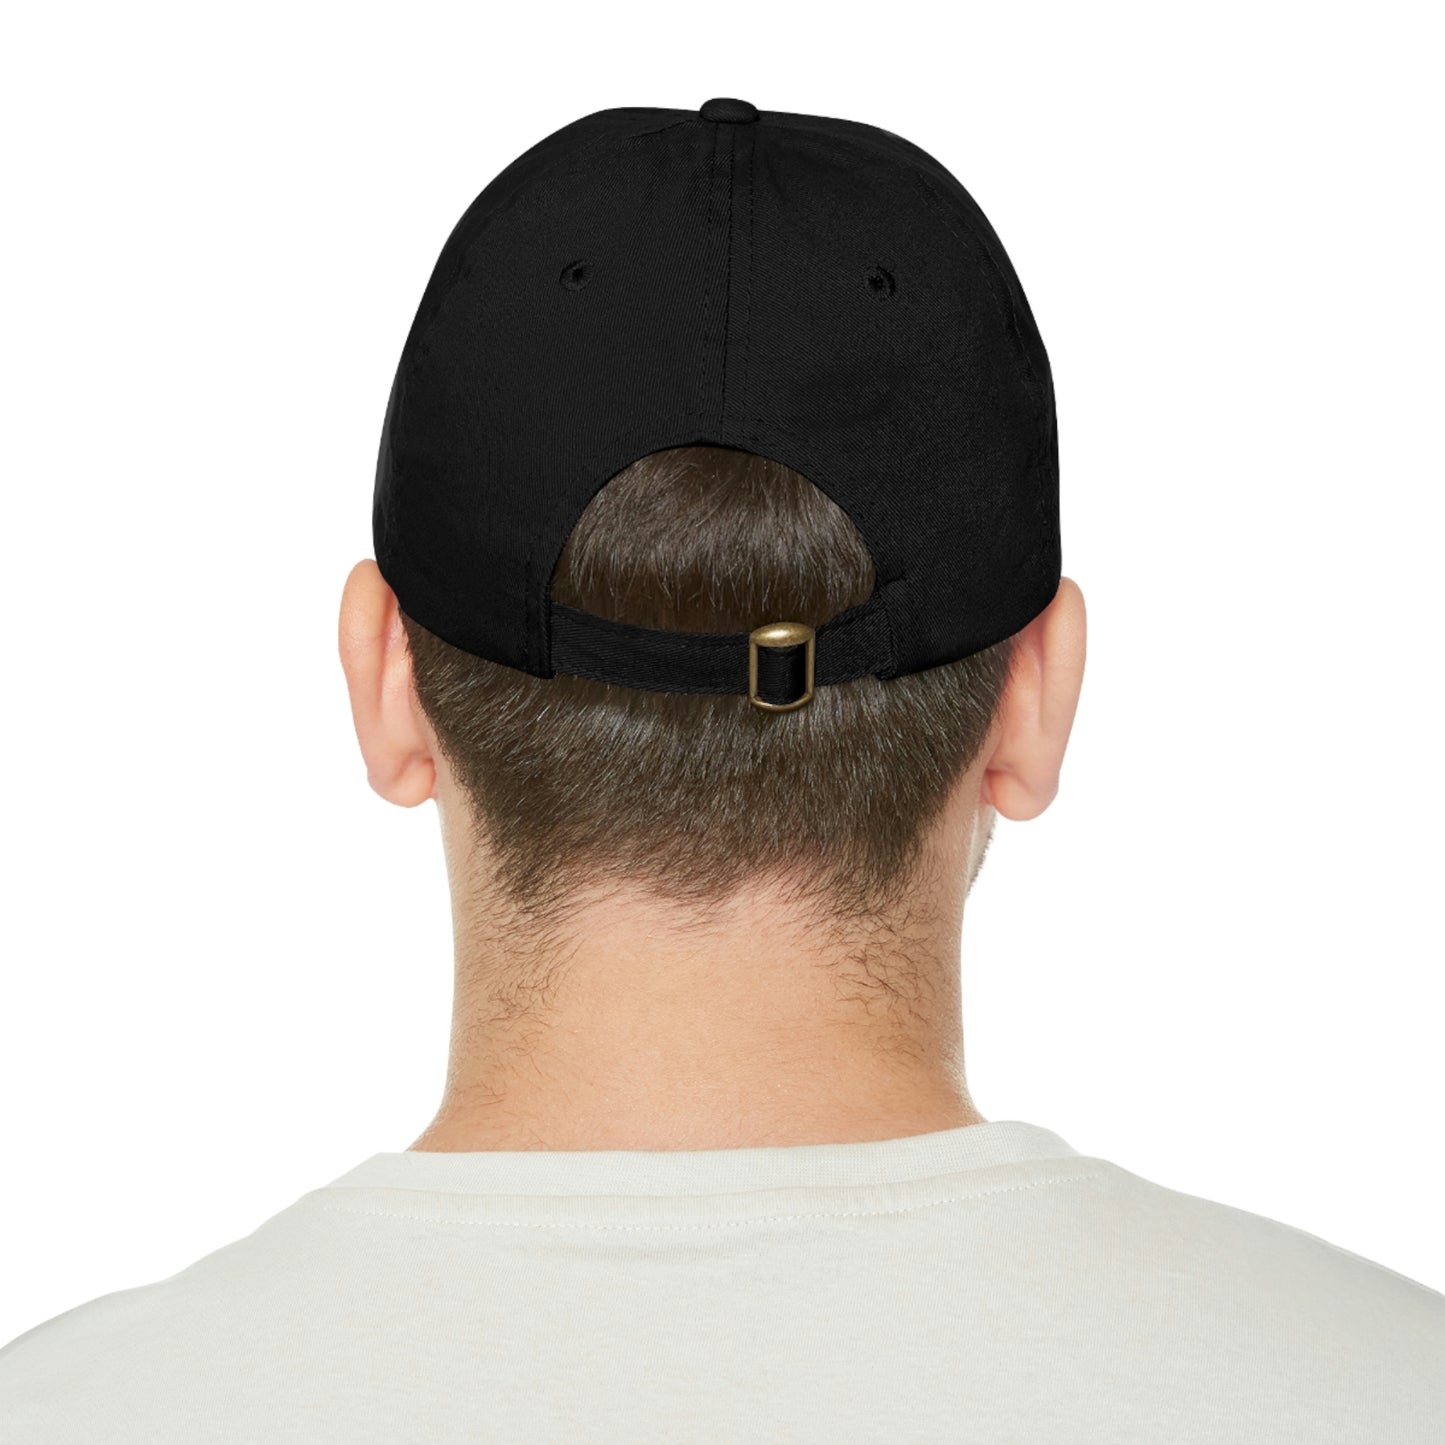 The Leather Logger Hat